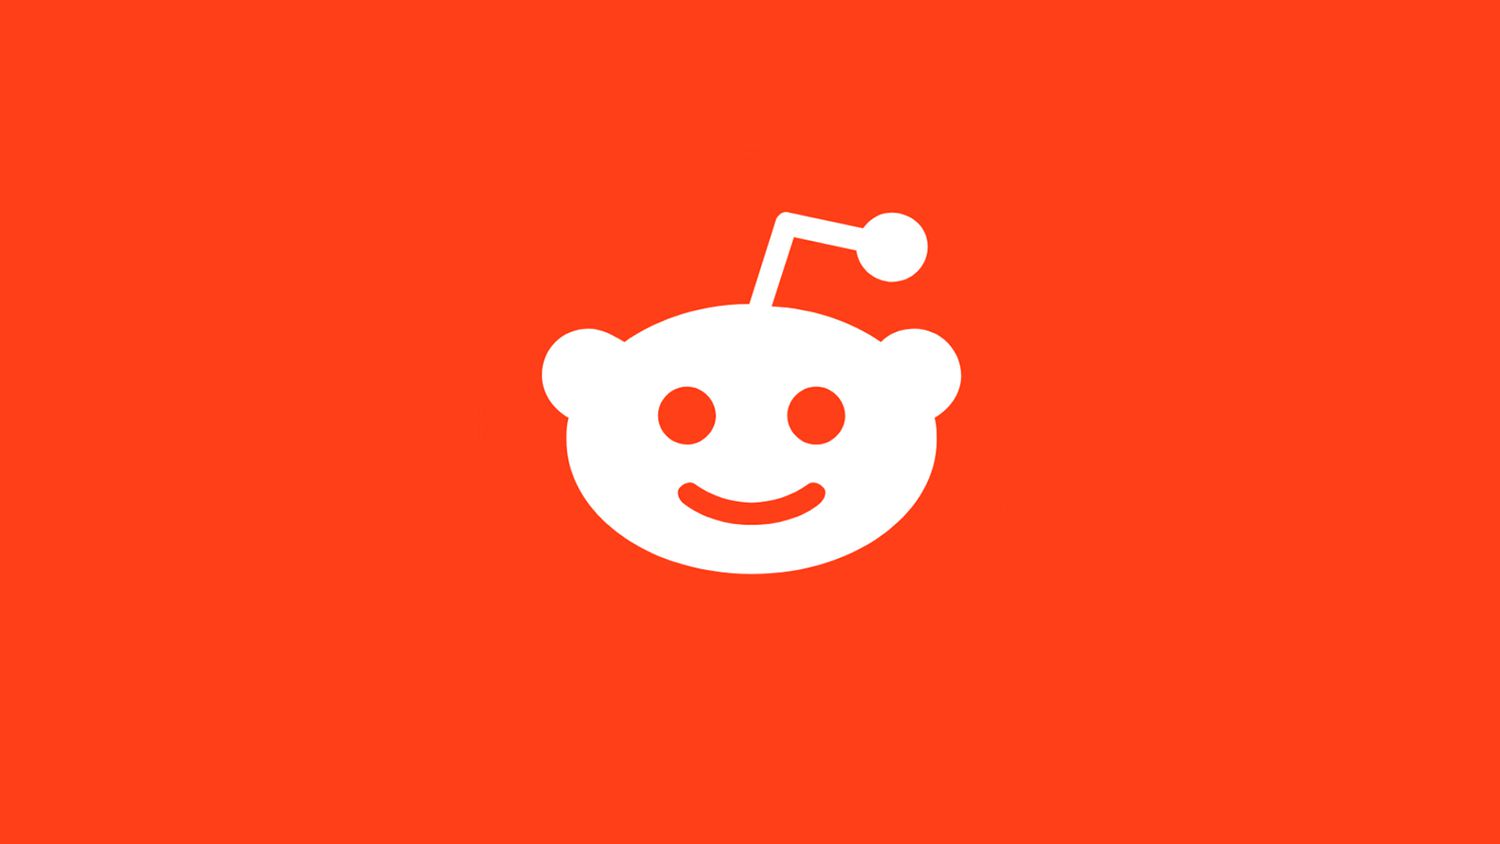 Reddit Considers Initial Public Offering (IPO) As Talks With Potential Investors Surface